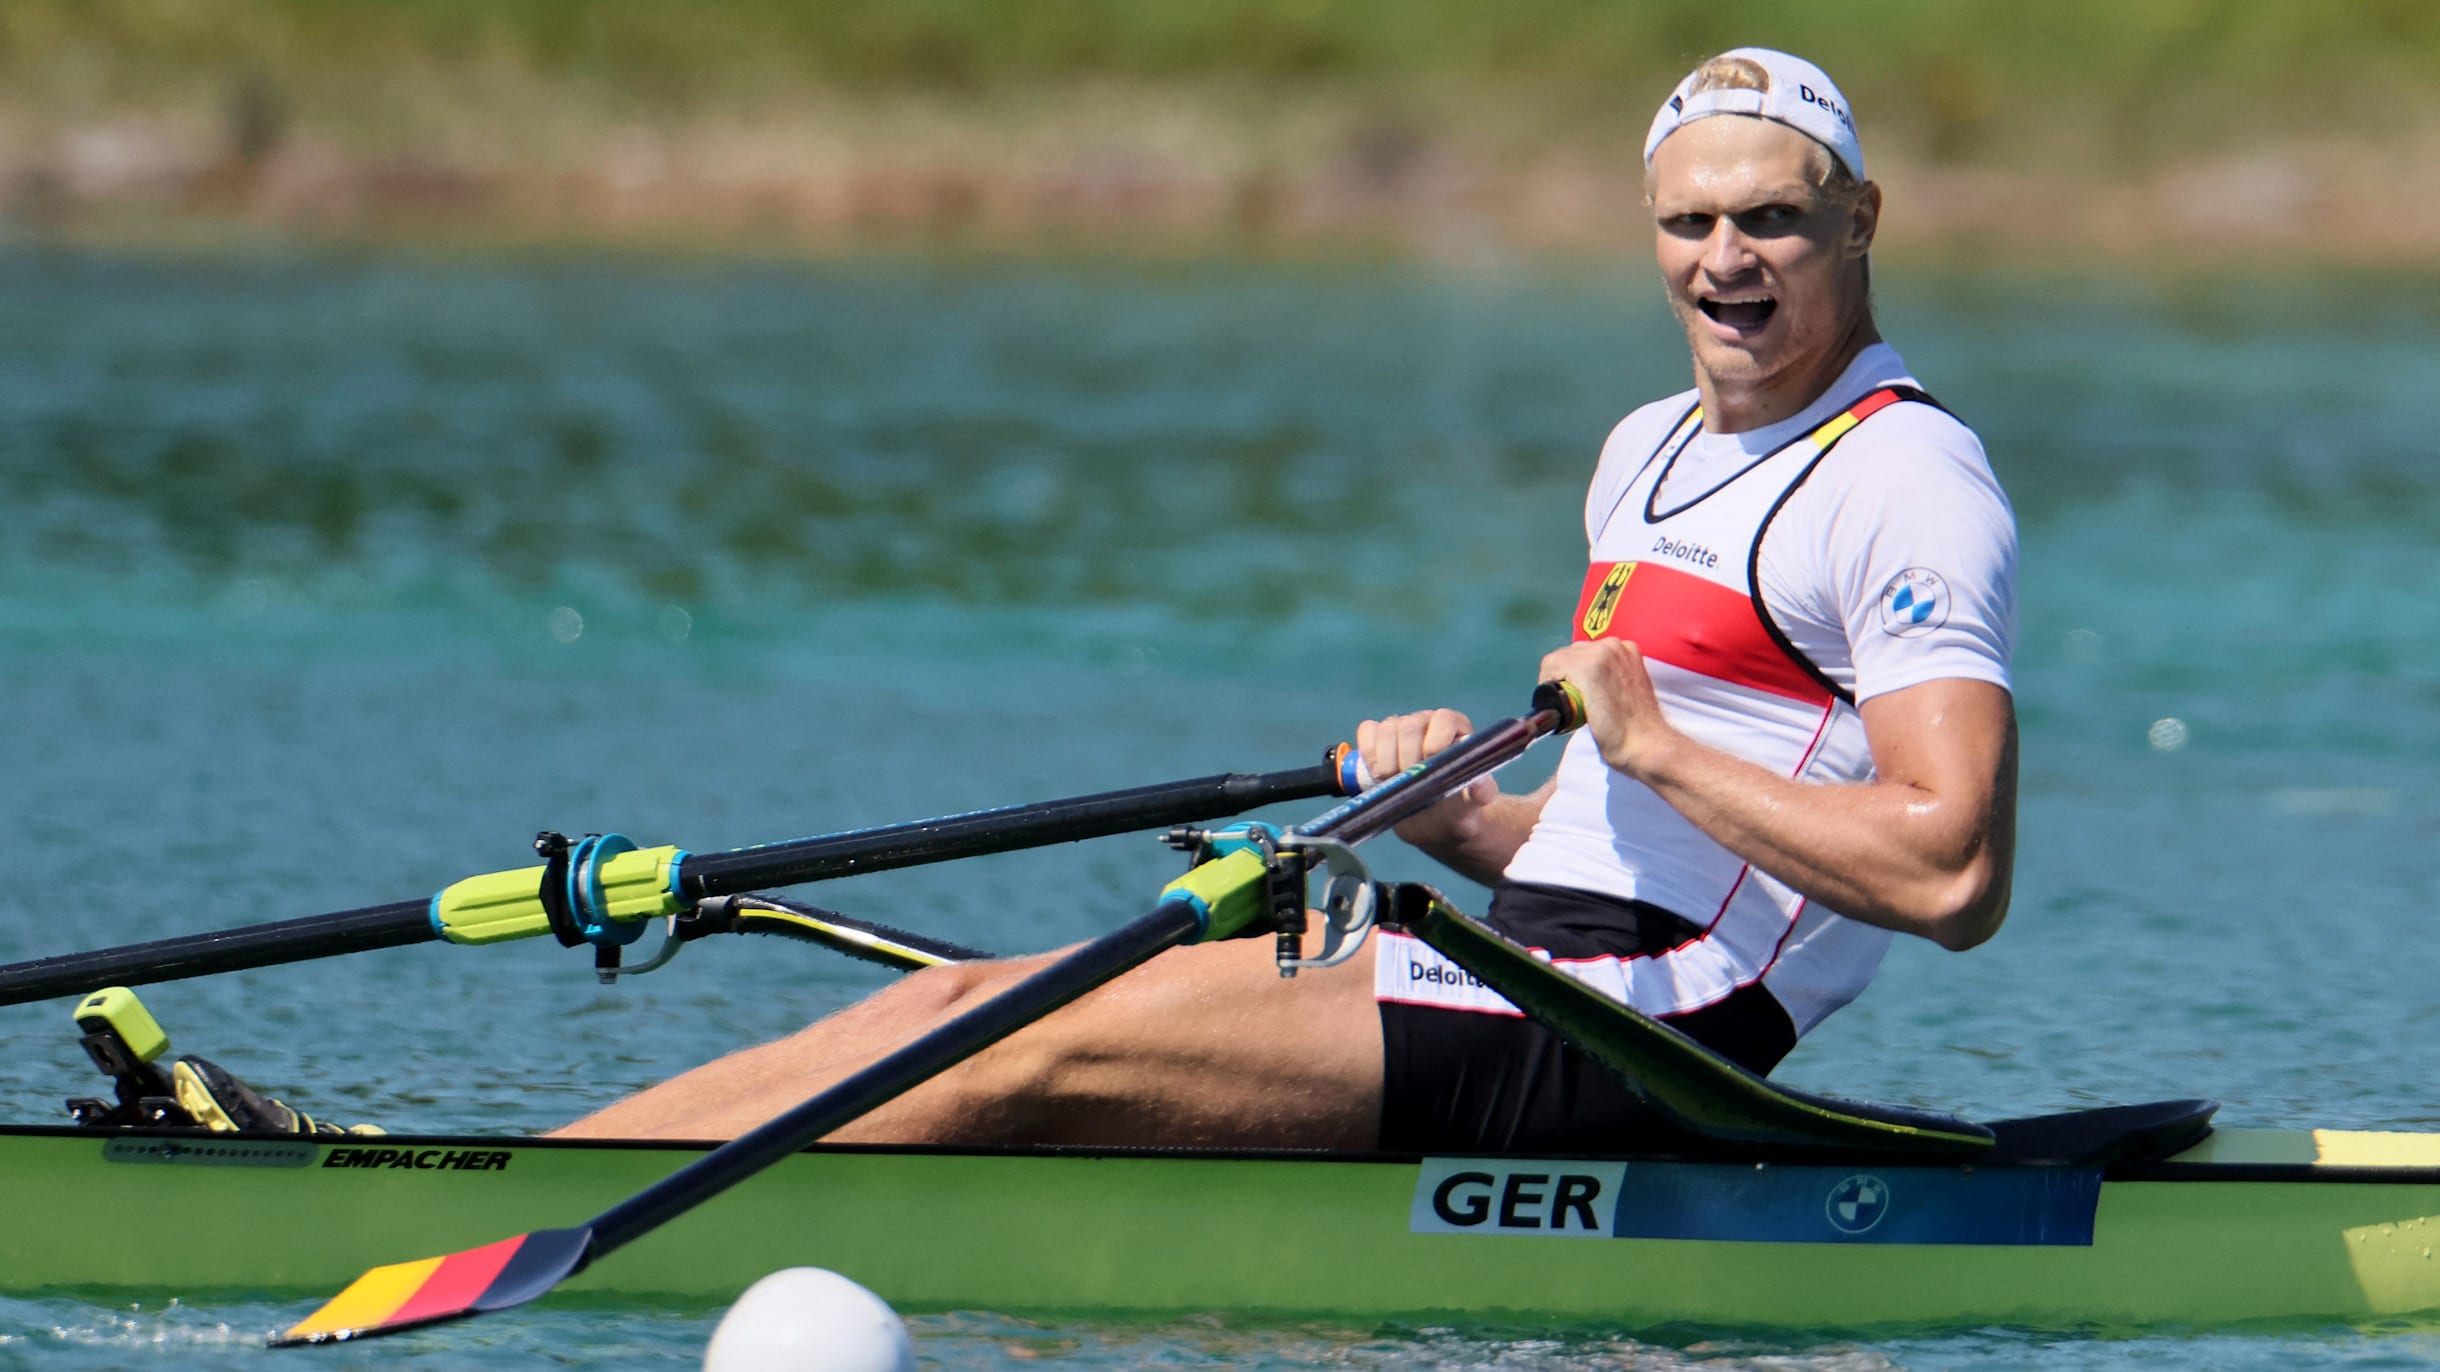 World Rowing Championships 2023 preview Full schedule and how to watch the main Paris 2024 Olympic qualifier